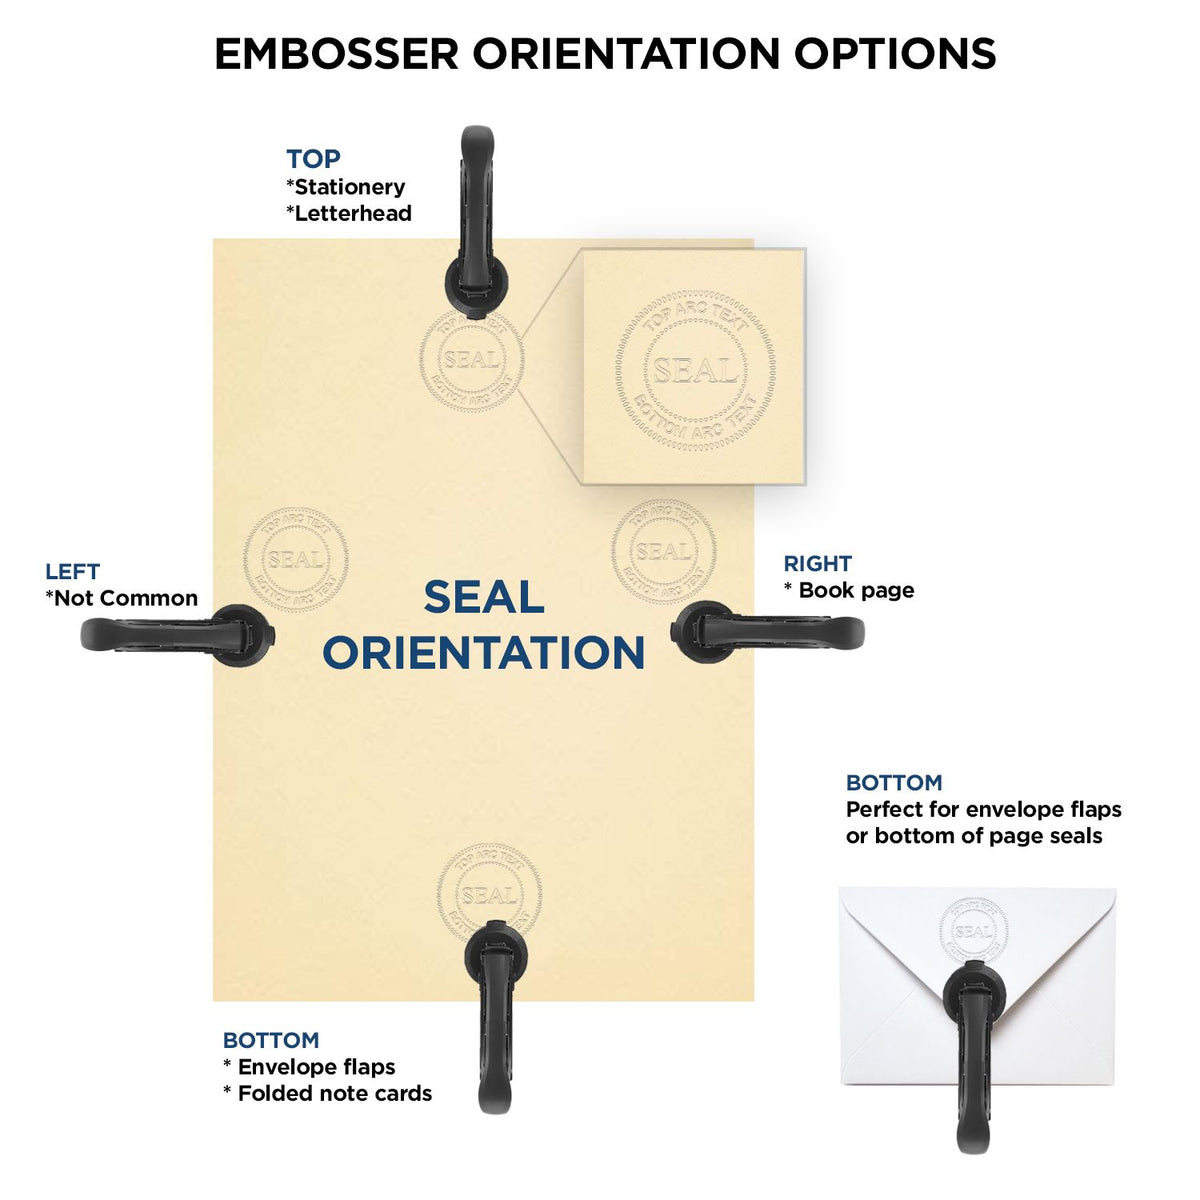 An infographic for the Hybrid Minnesota Land Surveyor Seal showing embosser orientation, this is showing examples of a top, bottom, right and left insert.